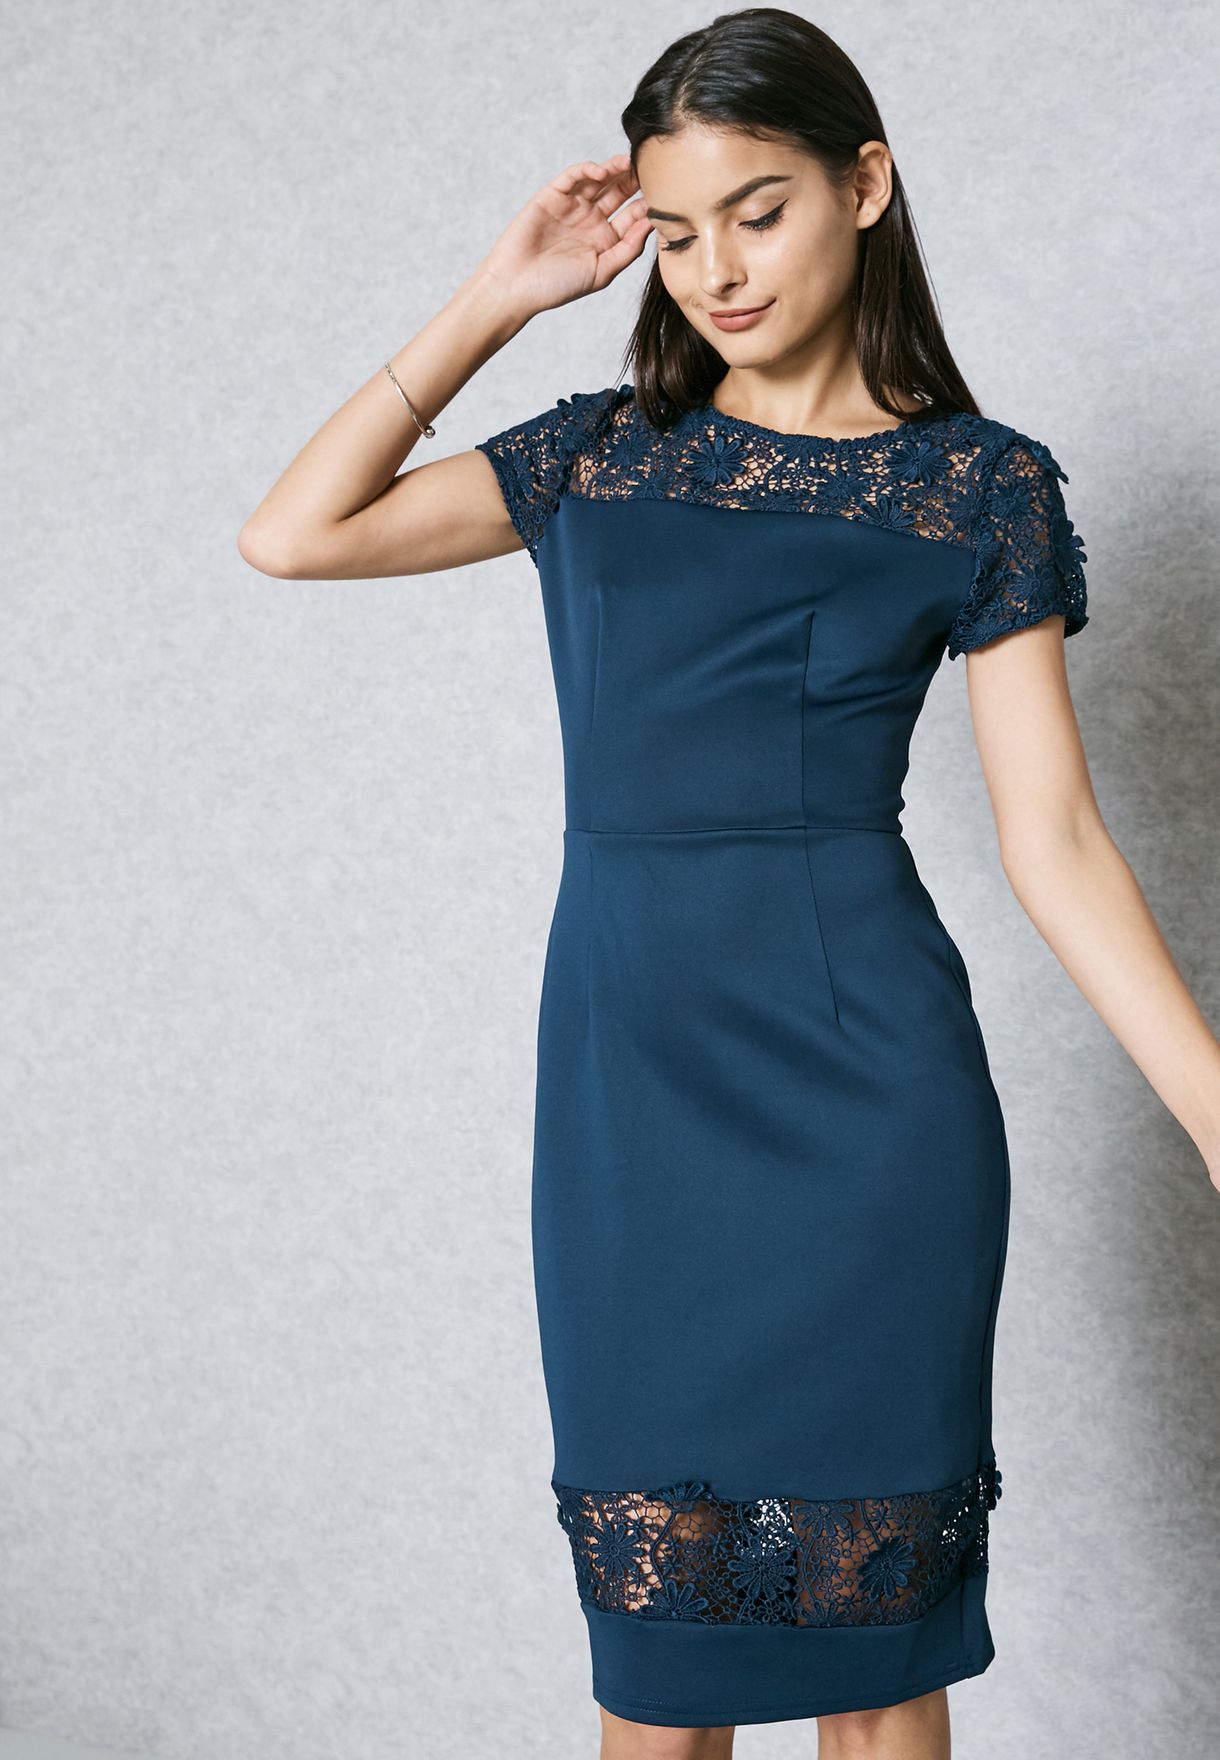 Buy > dorothy perkins navy lace dress > in stock